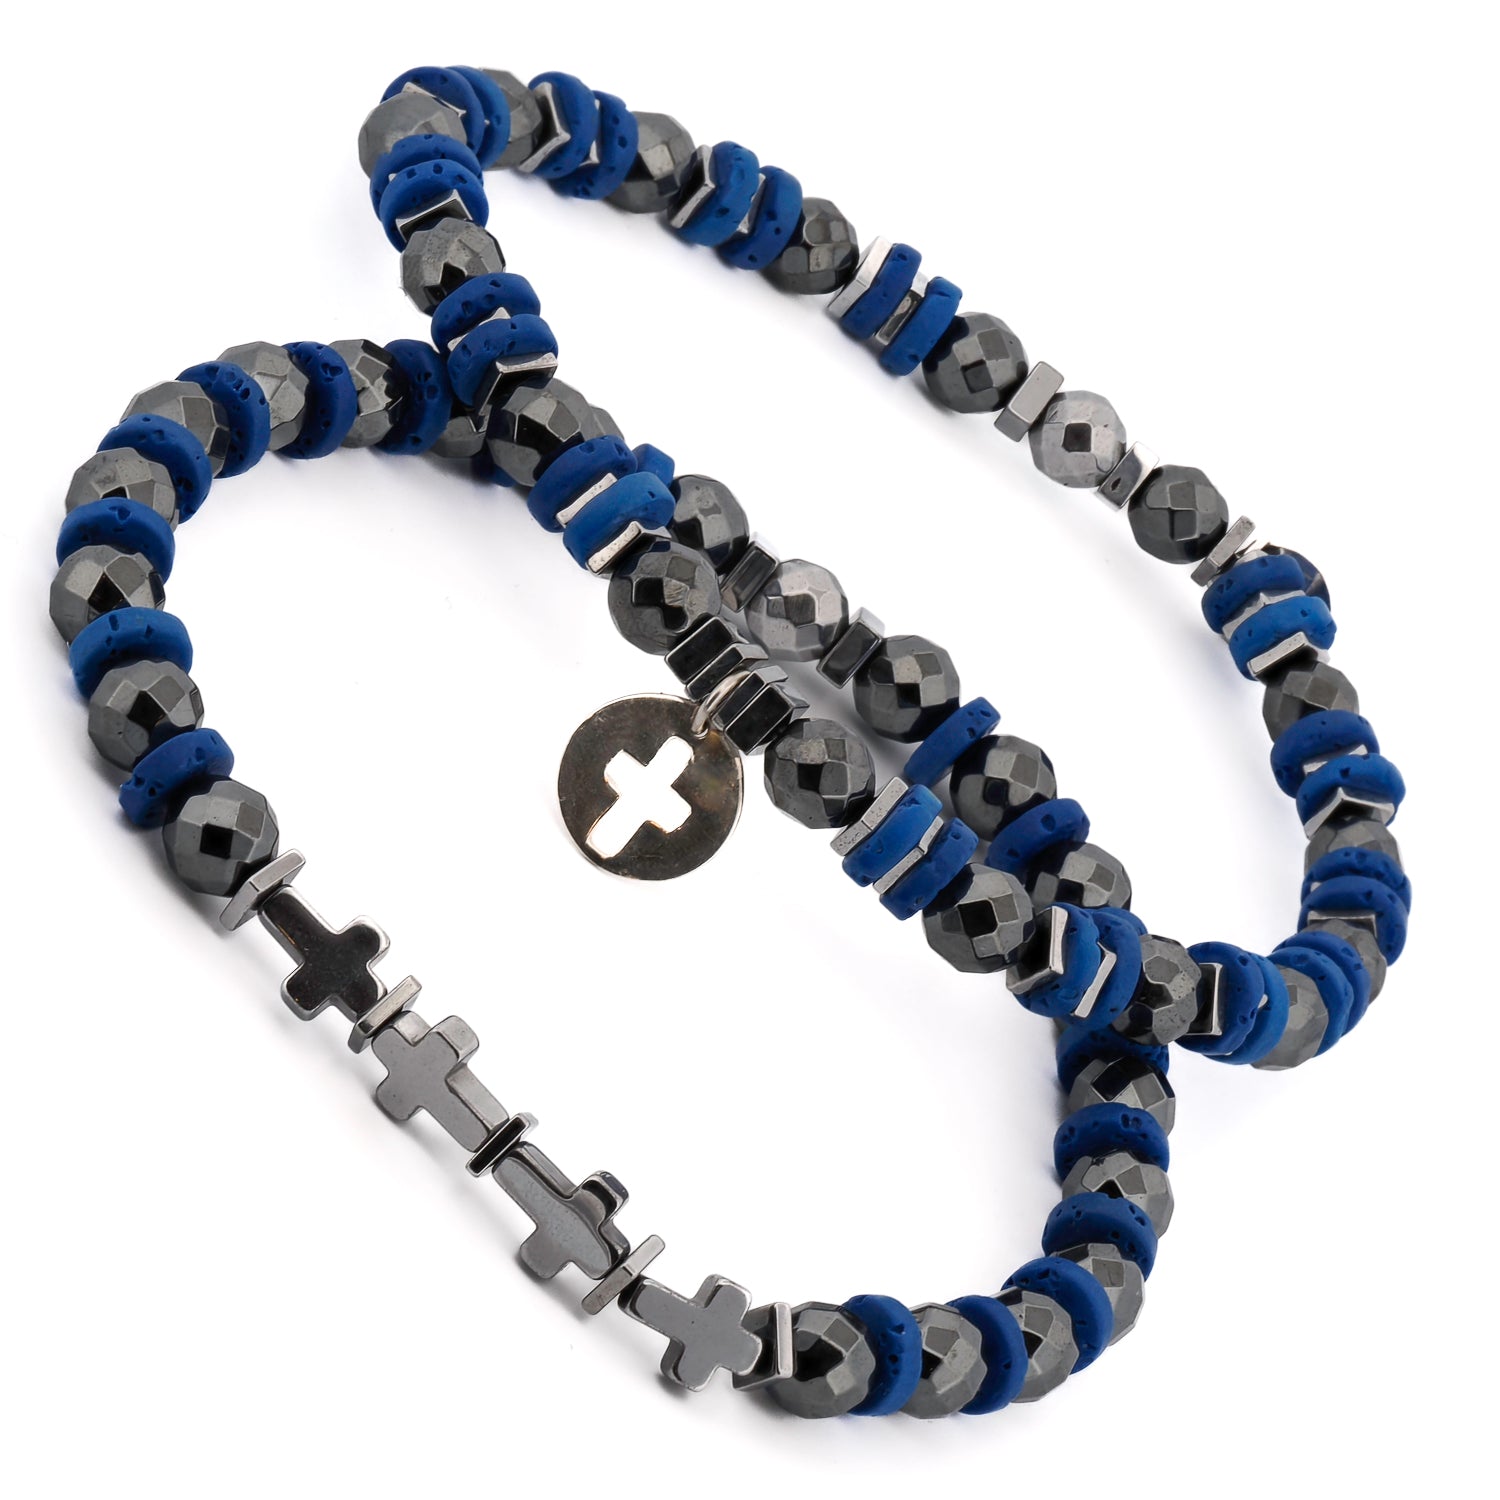 Men's Spiritual Beaded Bracelet Set with hematite, blue lava rock, and silver cross beads, offering positivity and protection